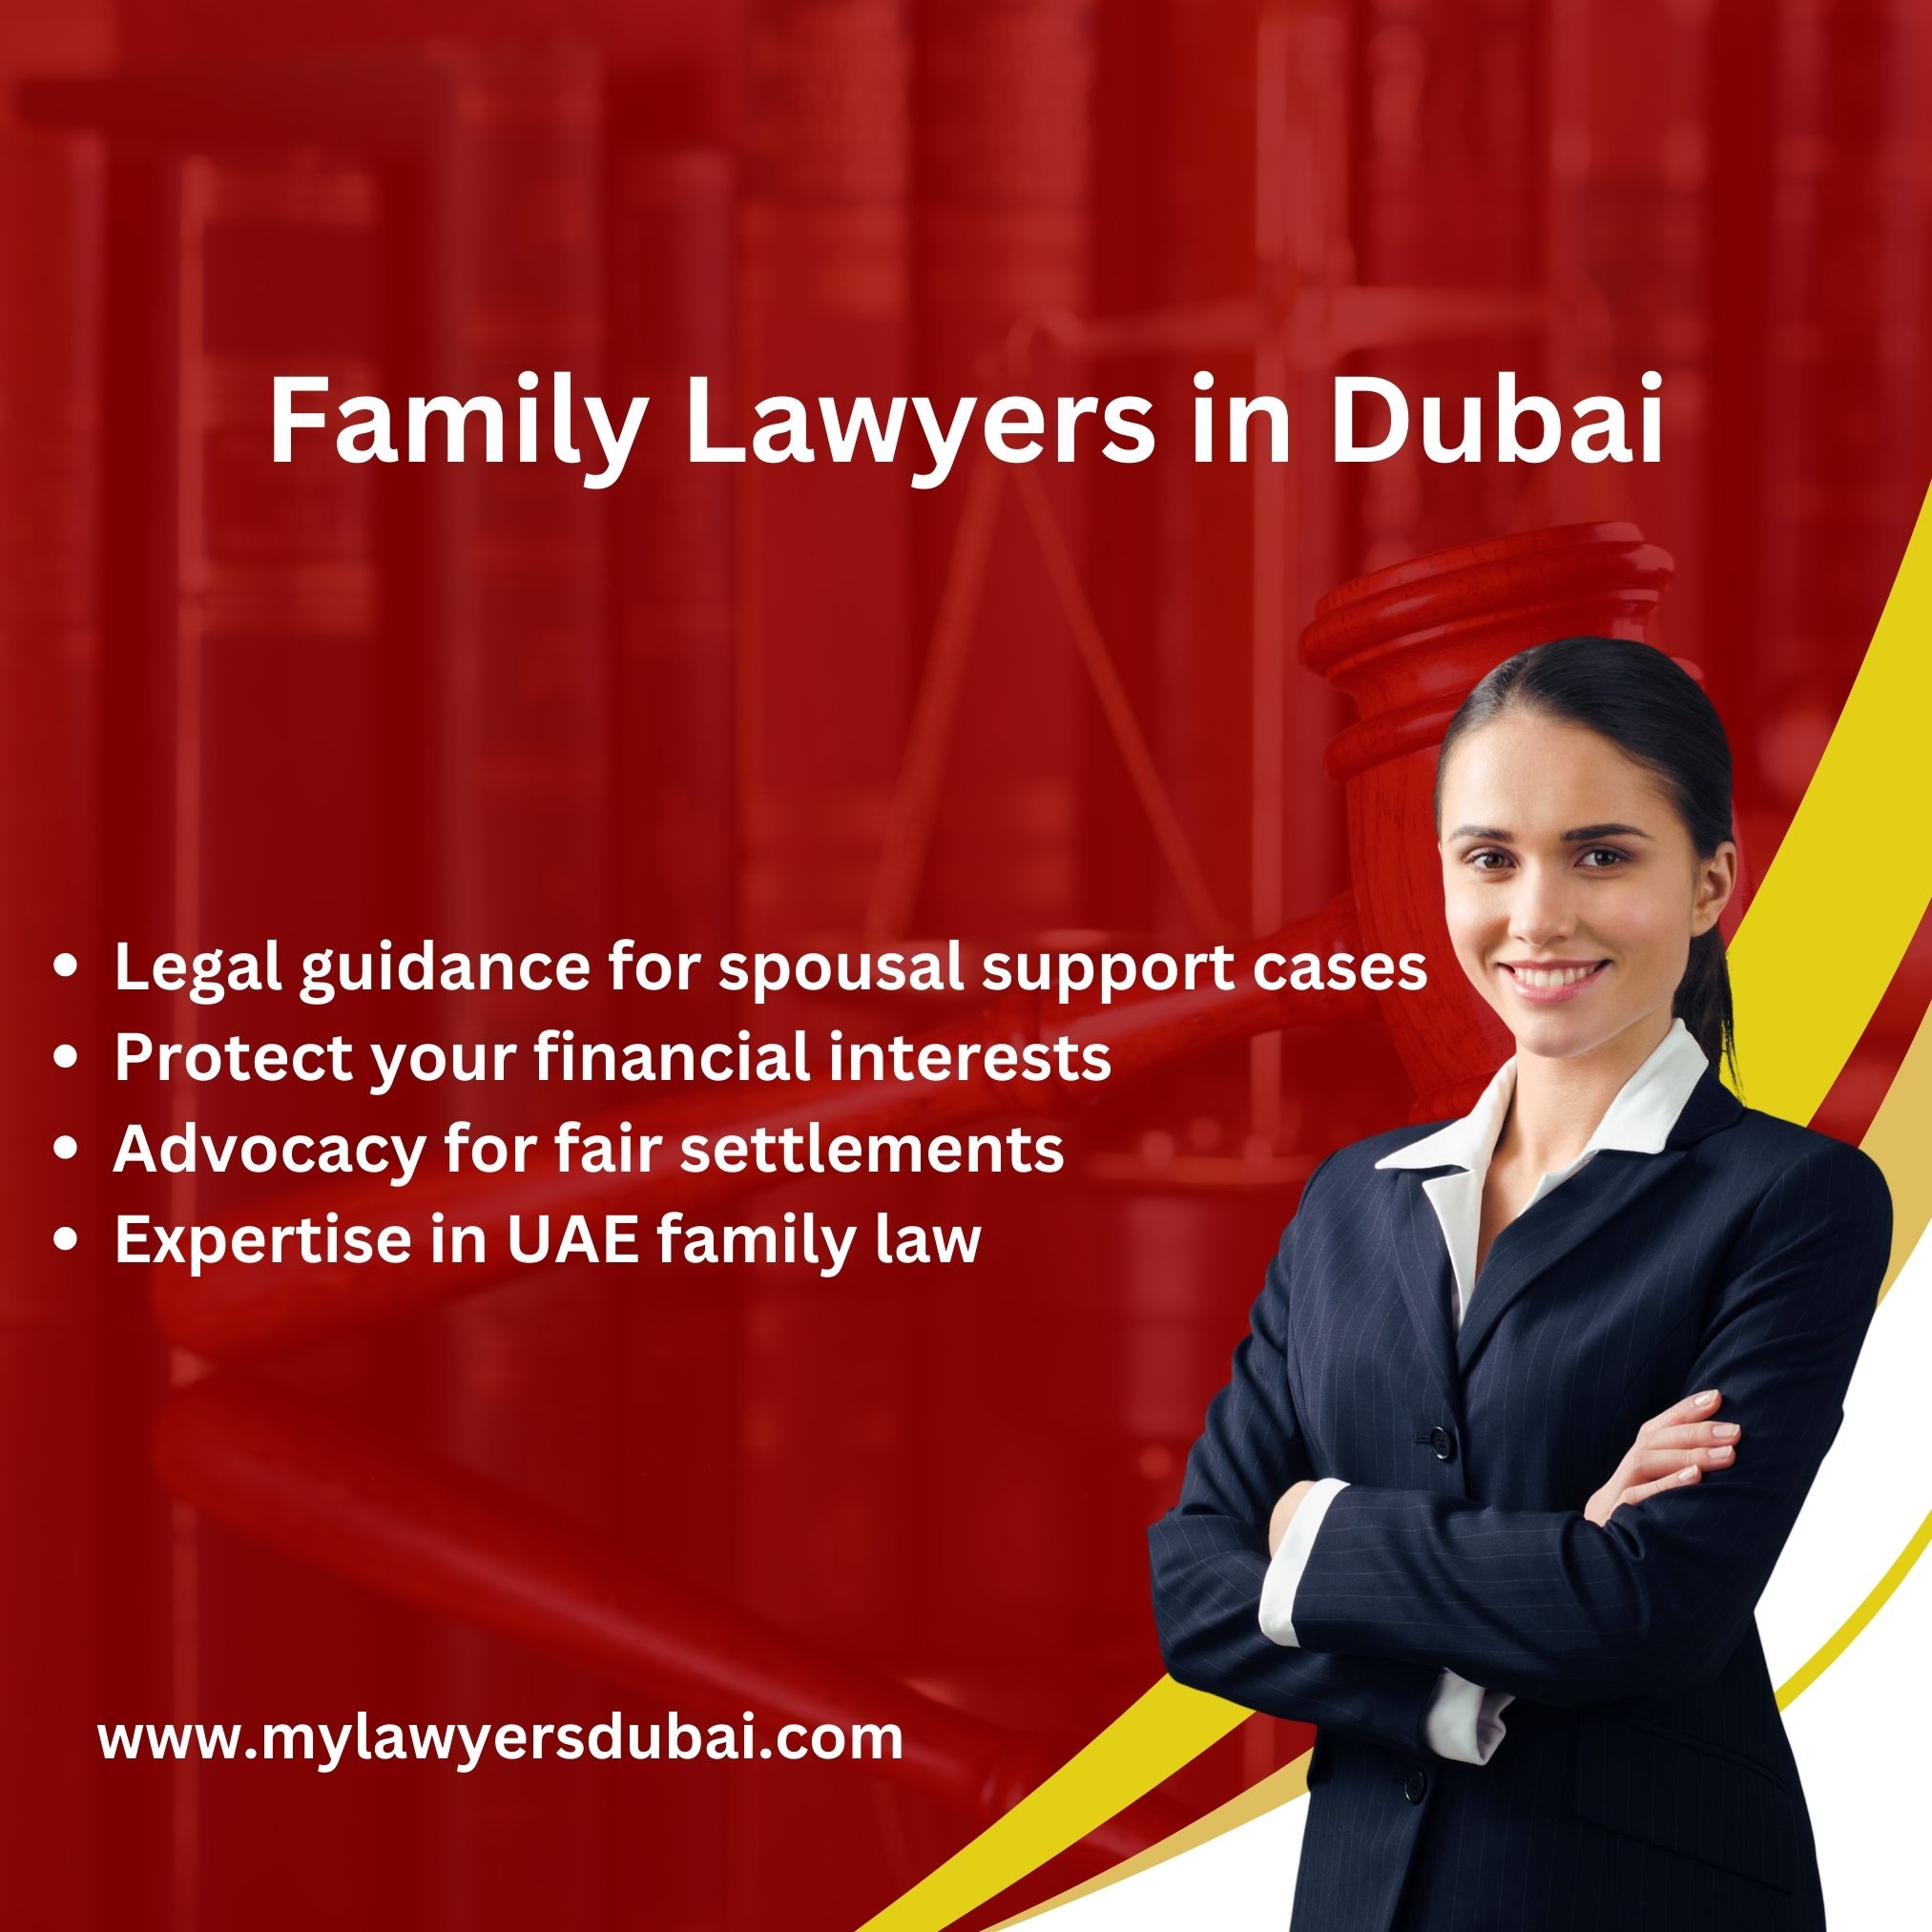 Spousal support lawyers in Dubai